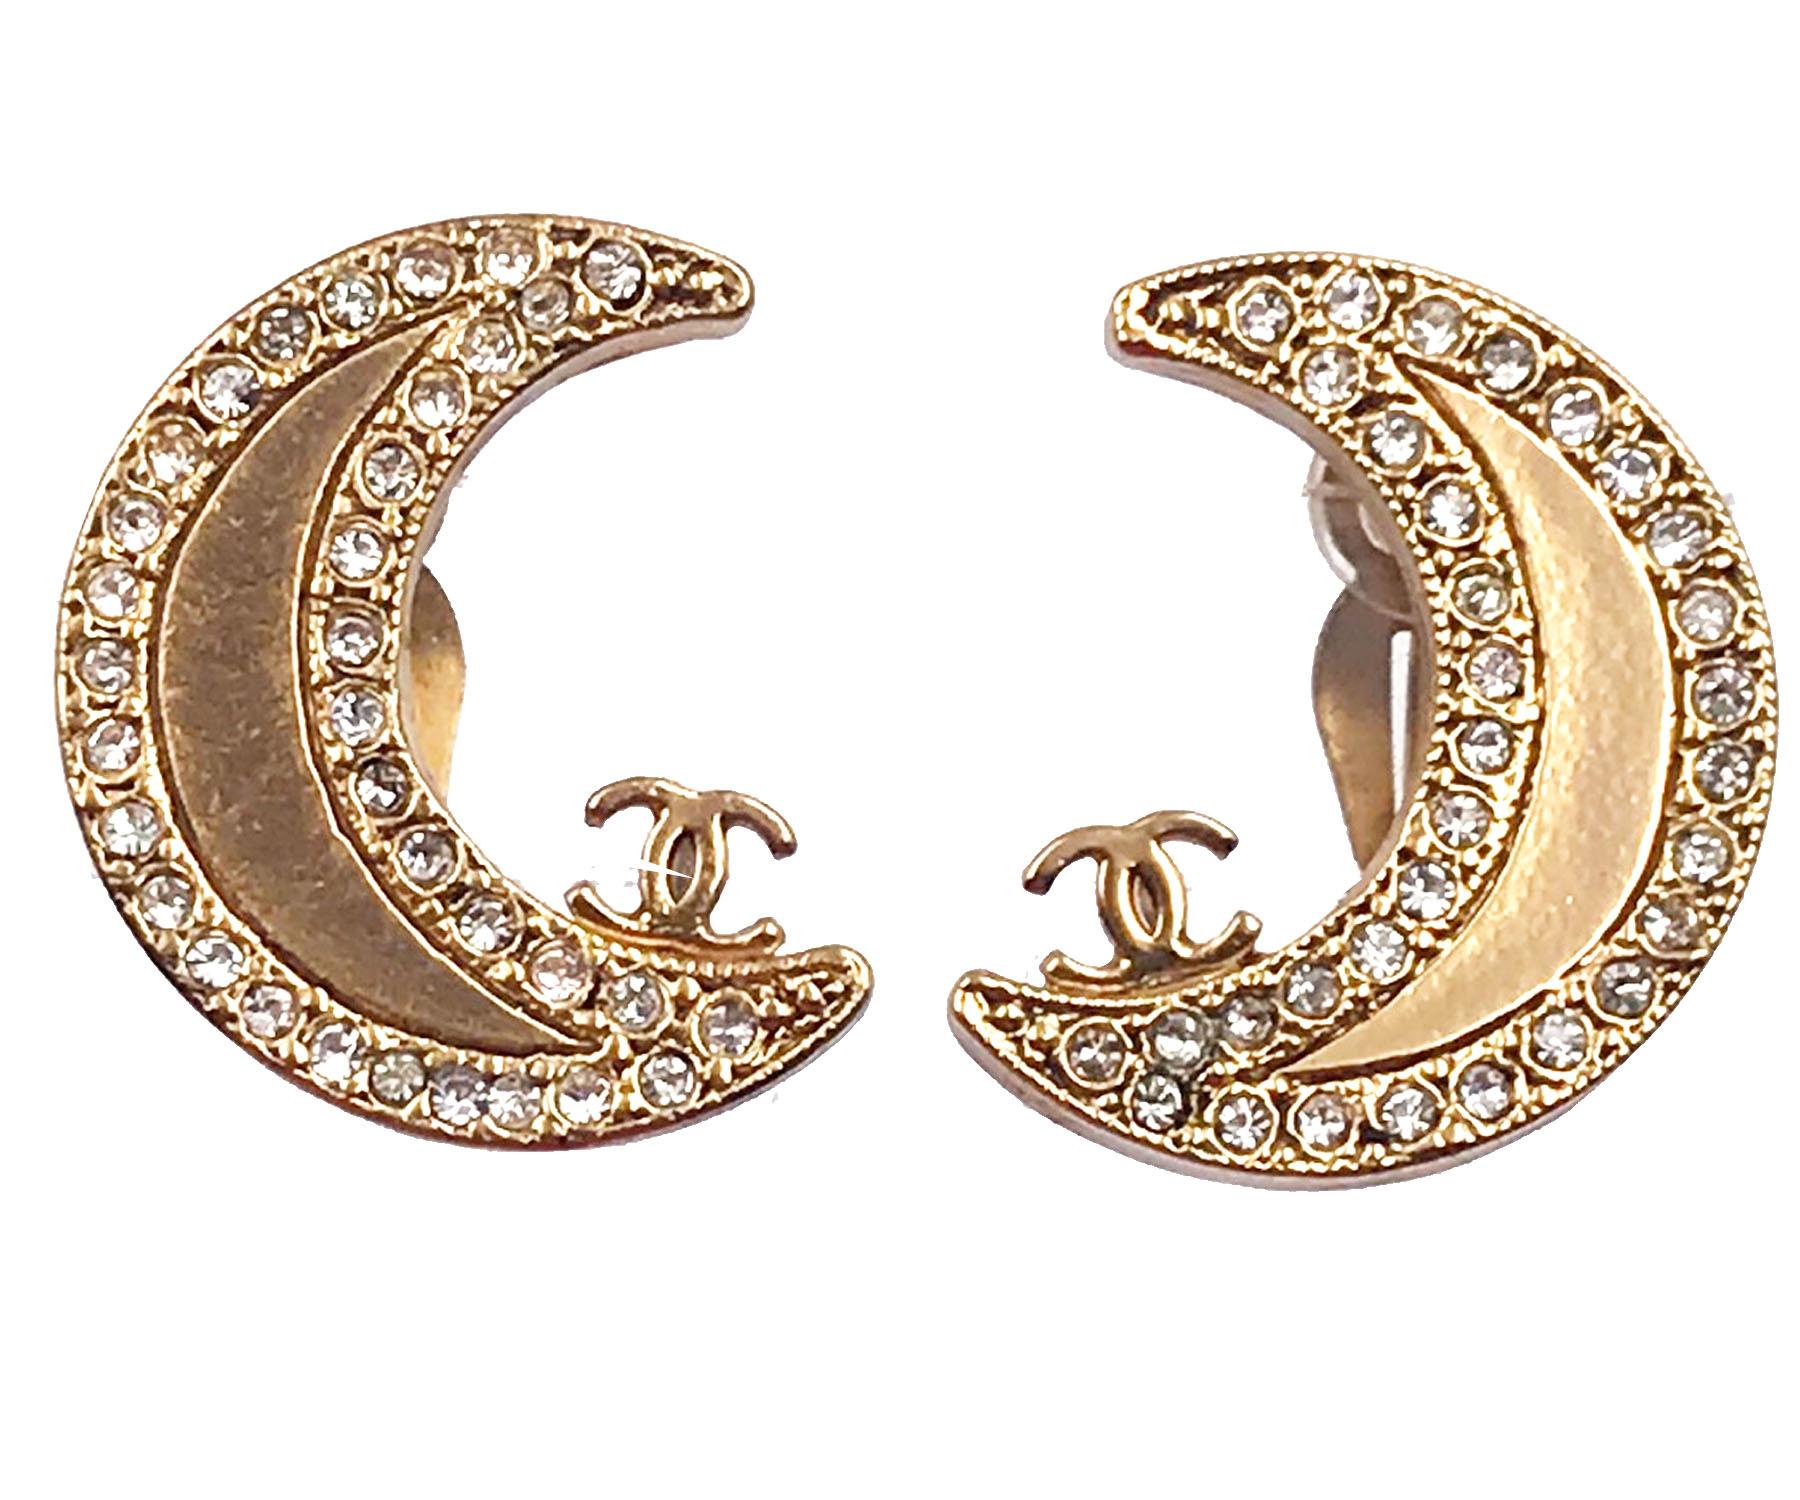 Chanel Gold CC Moon Crystal Clip on Earrings

*Marked 01
*Made in France
*Comes with the original box

-It is approximately 0.9